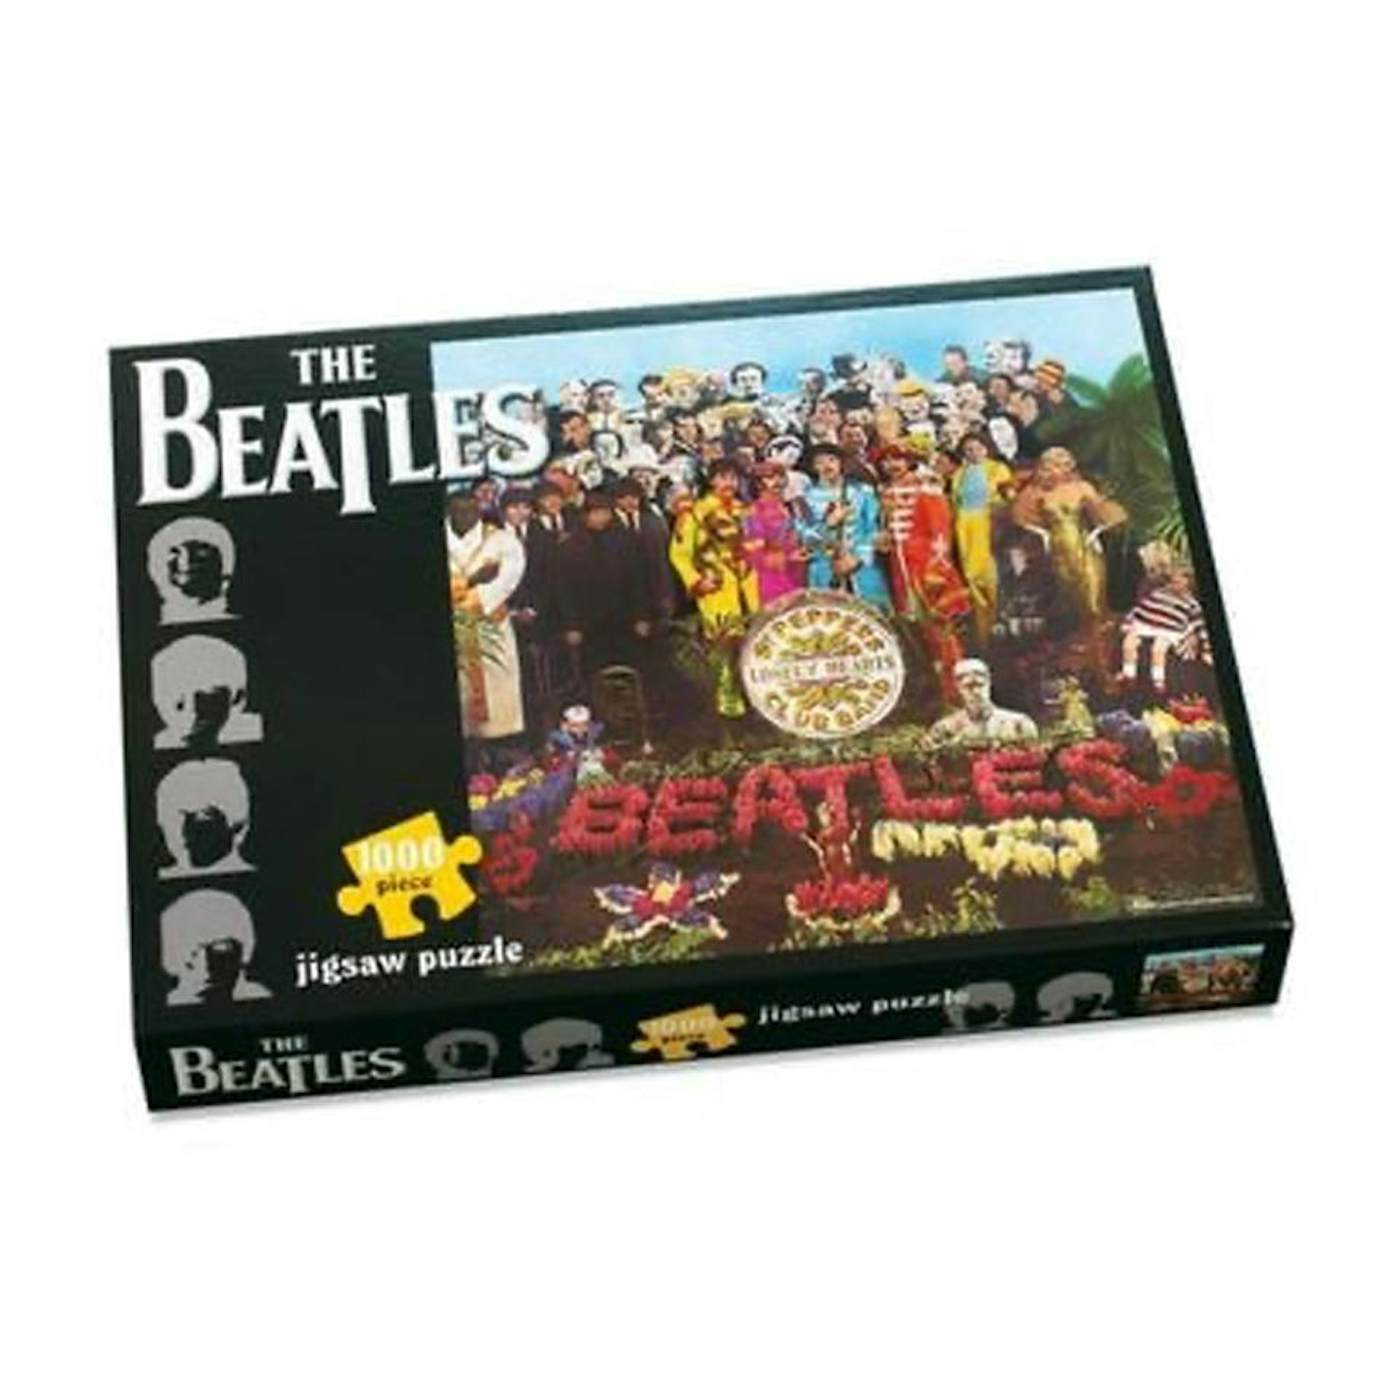 The Beatles Jigsaw Puzzle - Sgt Pepper 10 00 Piece